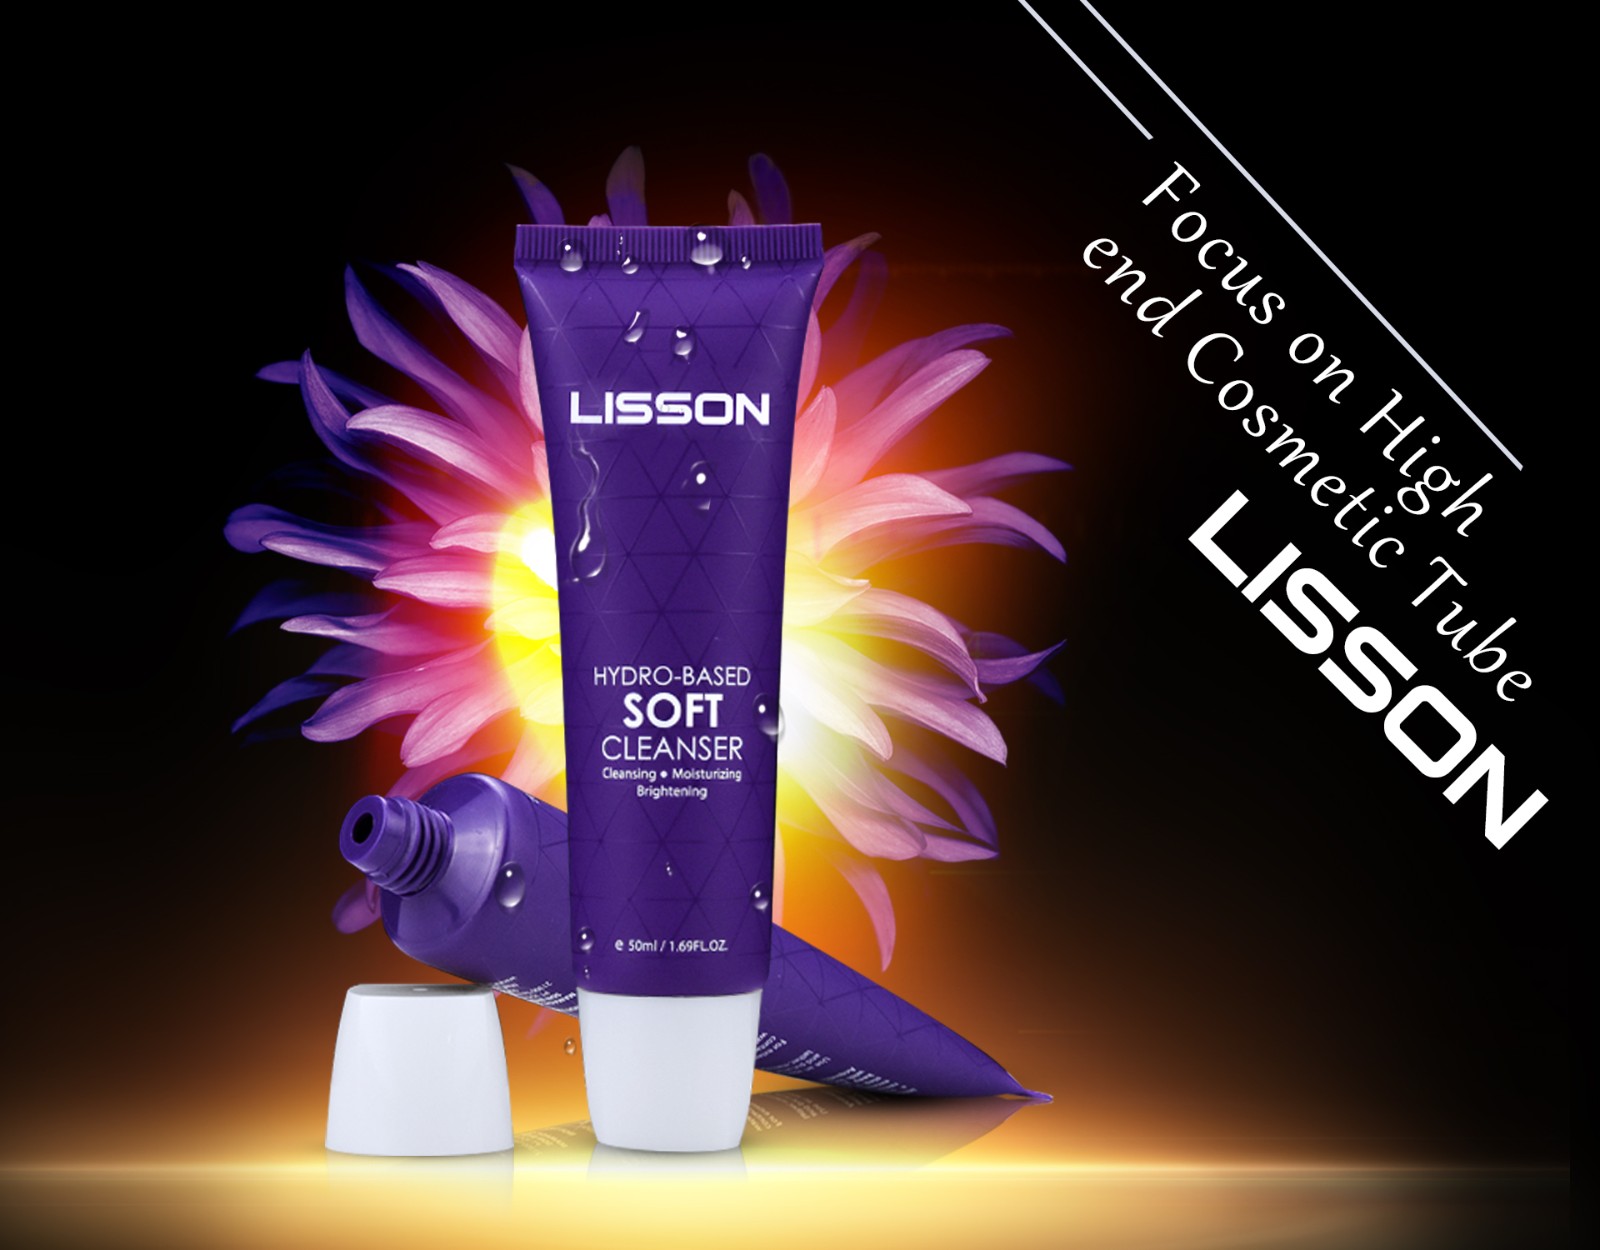 Lisson highly-rated plastic tube containers popular for makeup